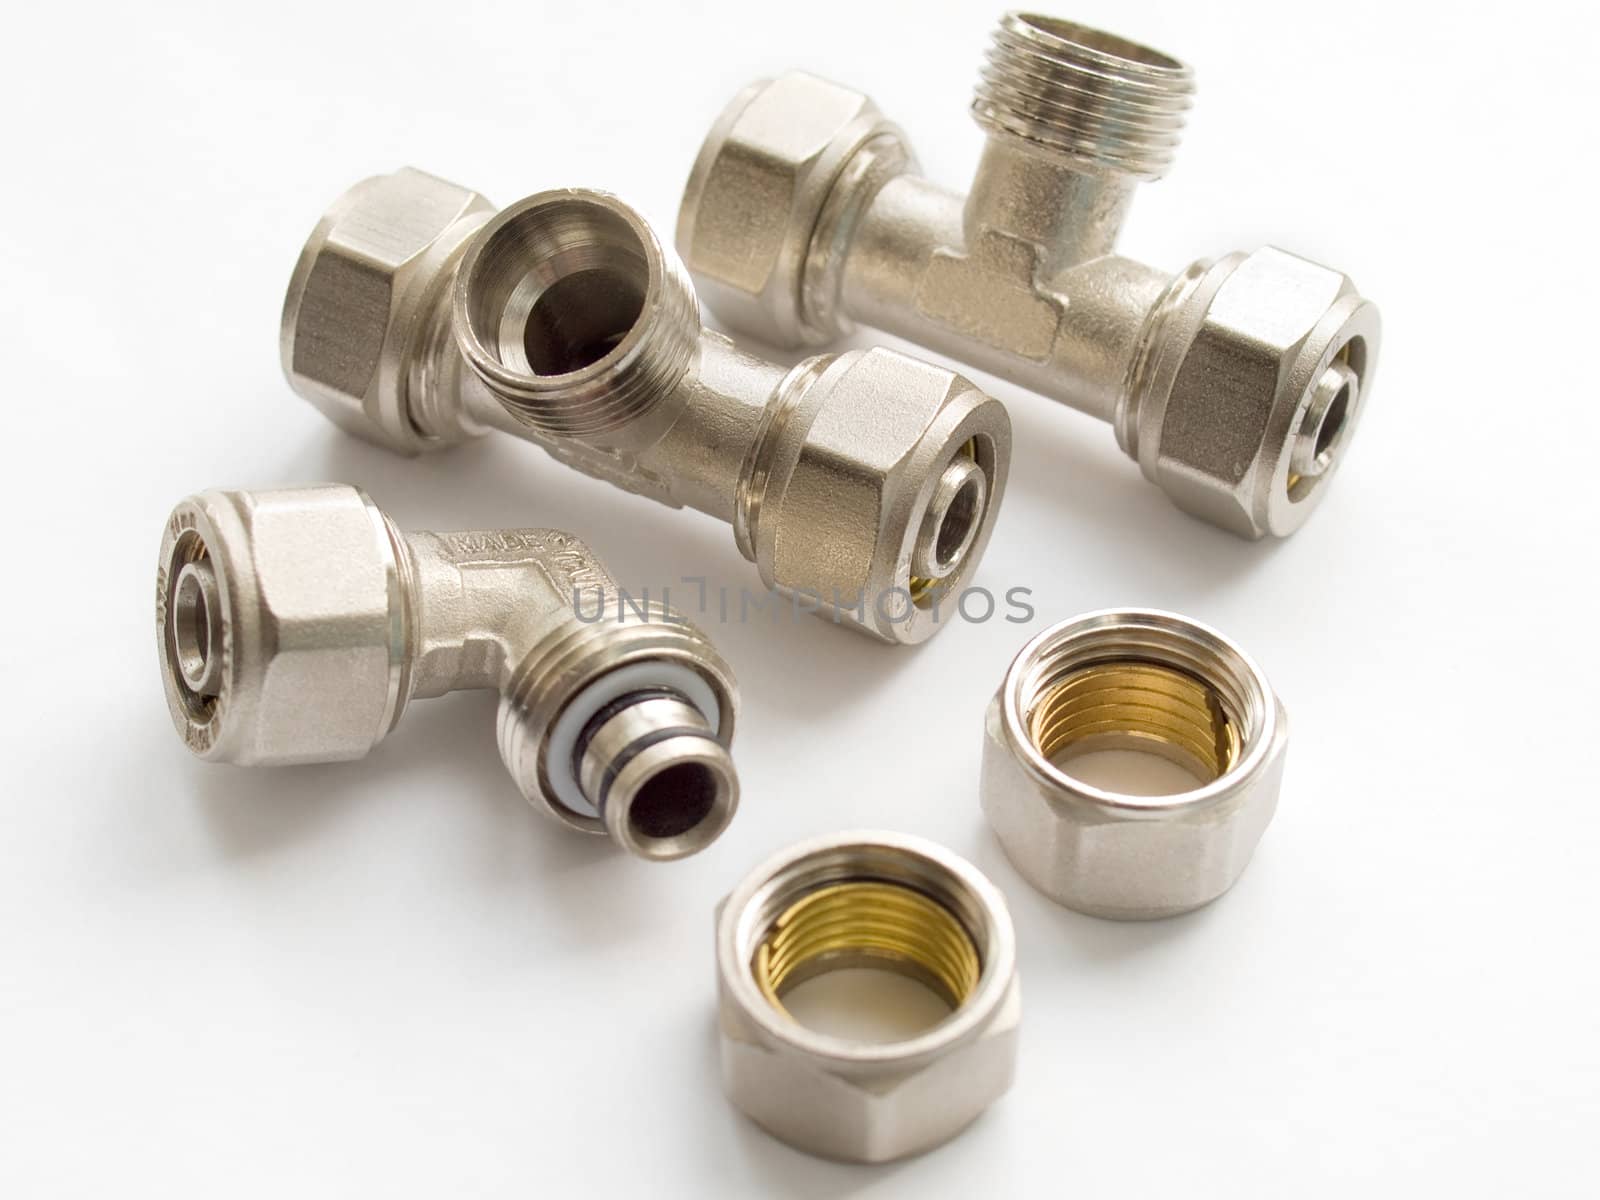 Waterpipe connectors on white background